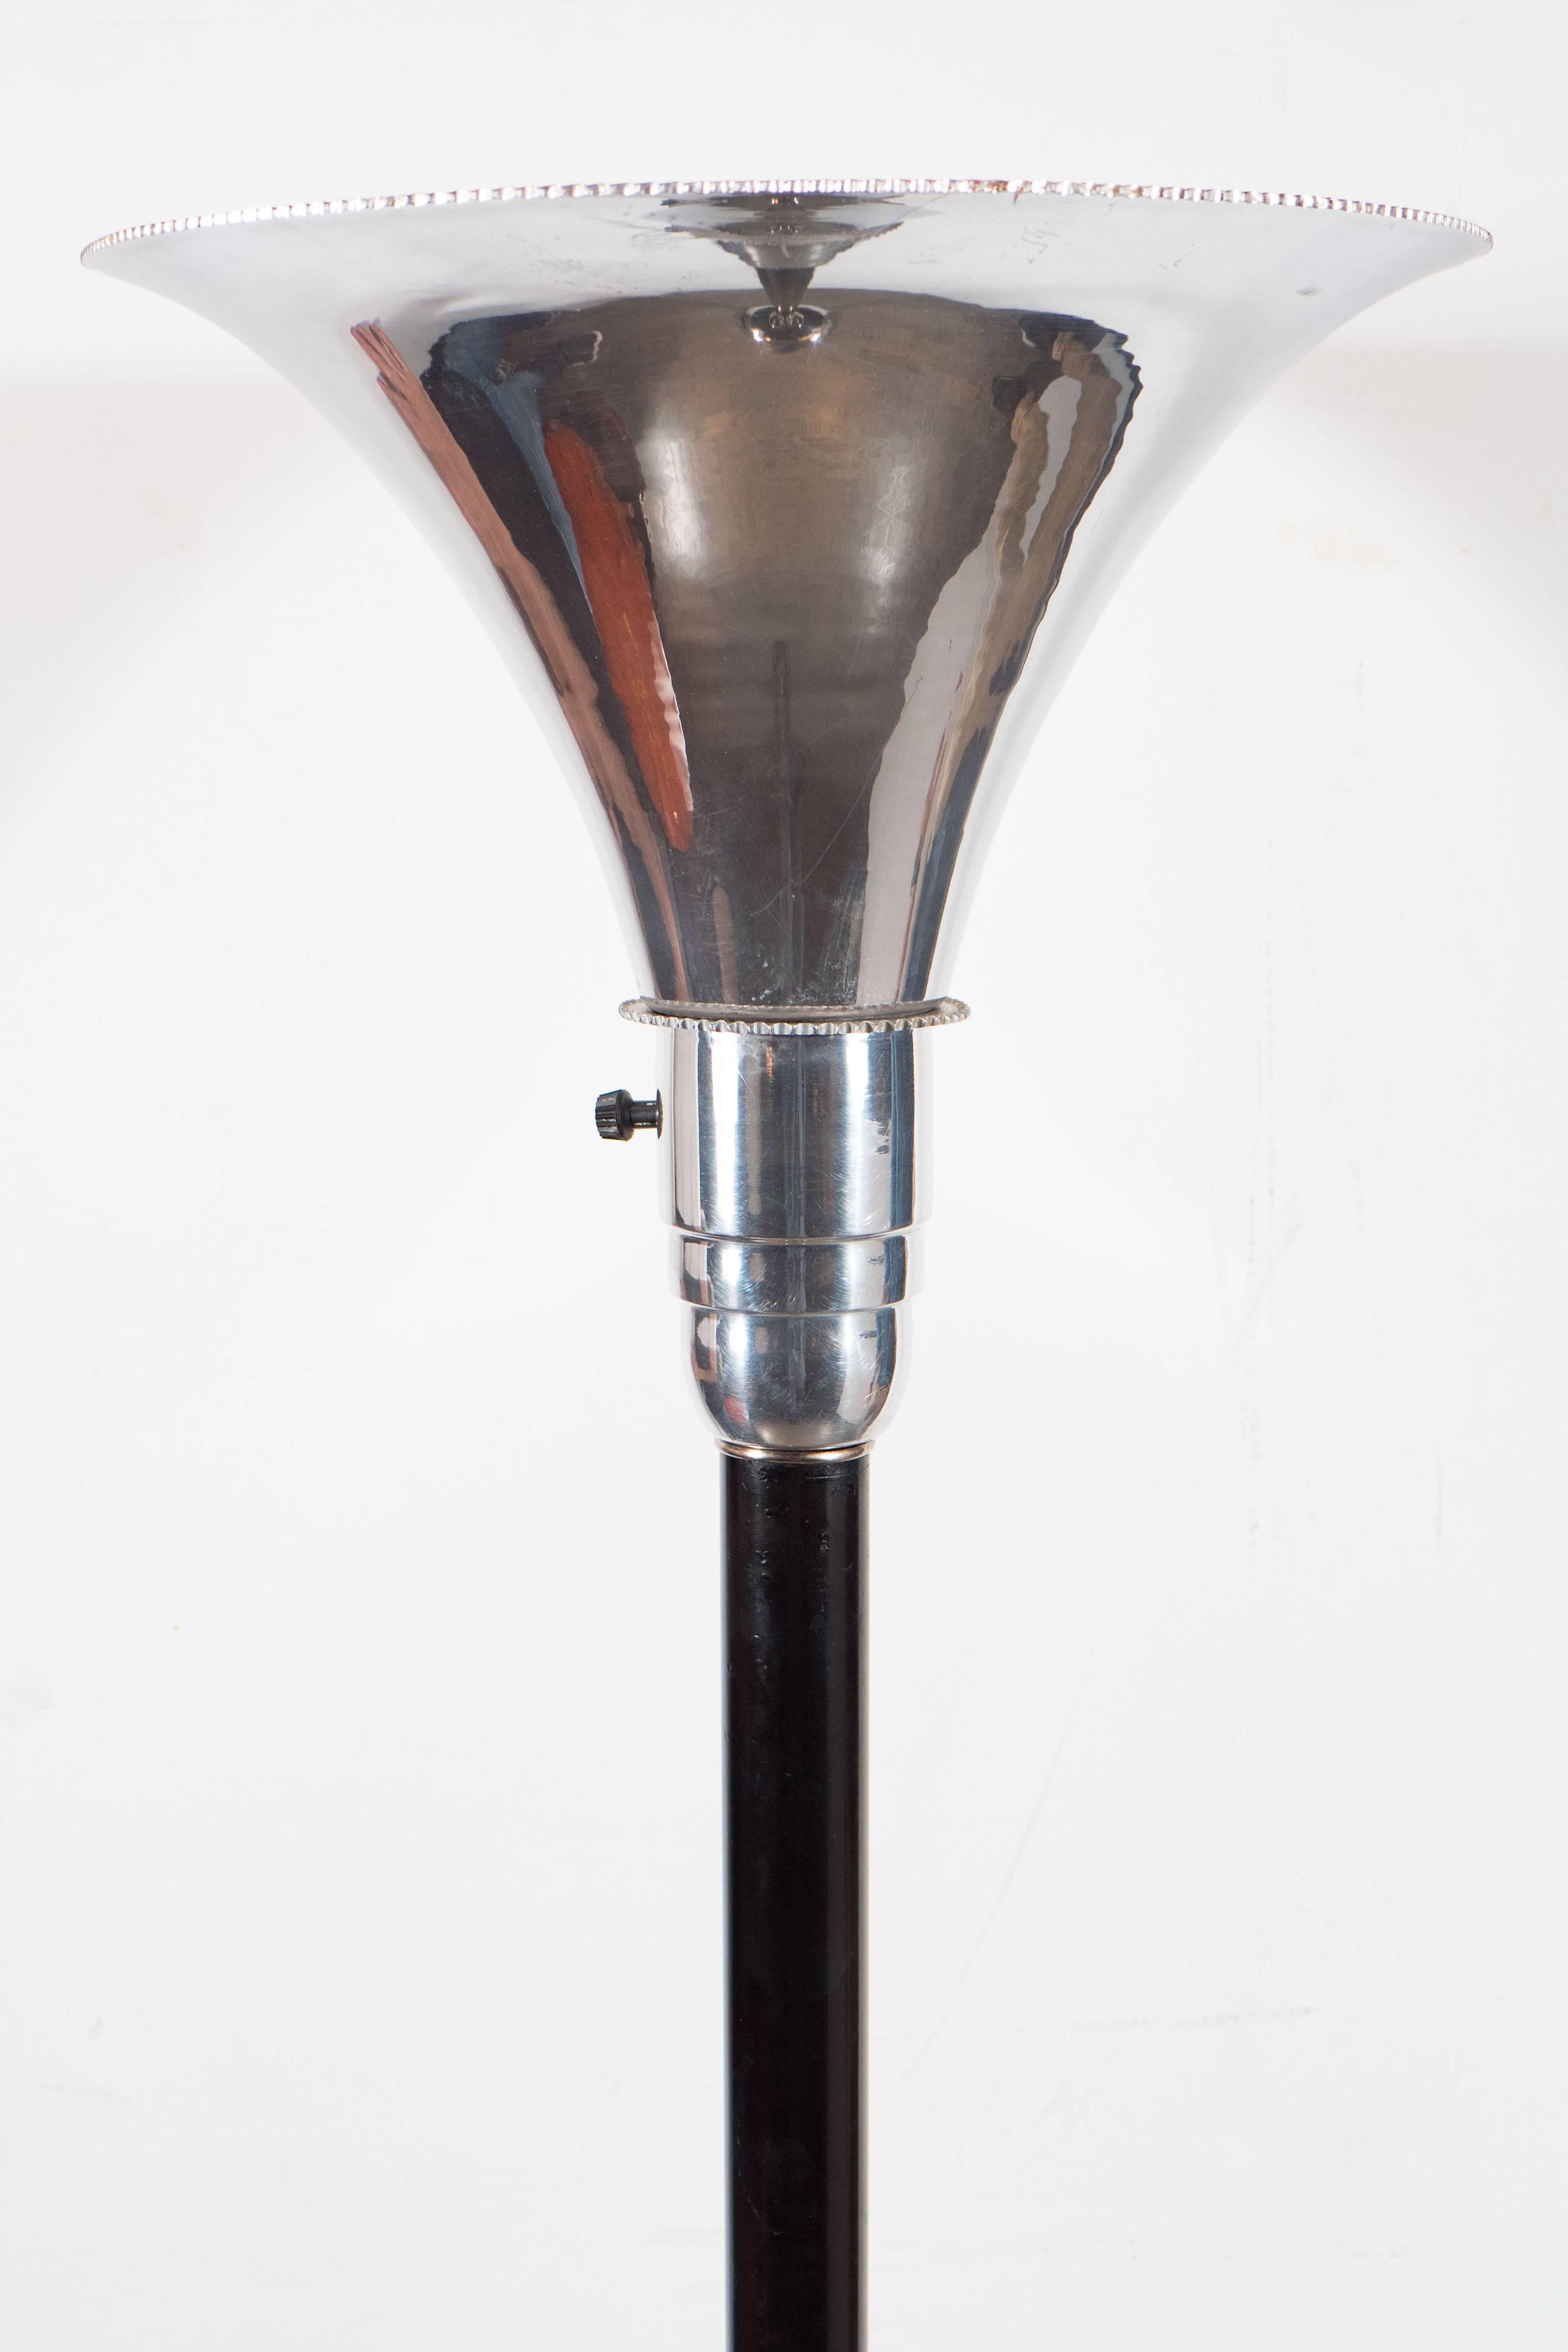 An Art Deco Machine Age torchiere. The base is a concentric circular design in contrasting black enamel and polished aluminum, the stem is also finished in black enamel, it supports a polished aluminum funnel shaped shade with a serrated detail